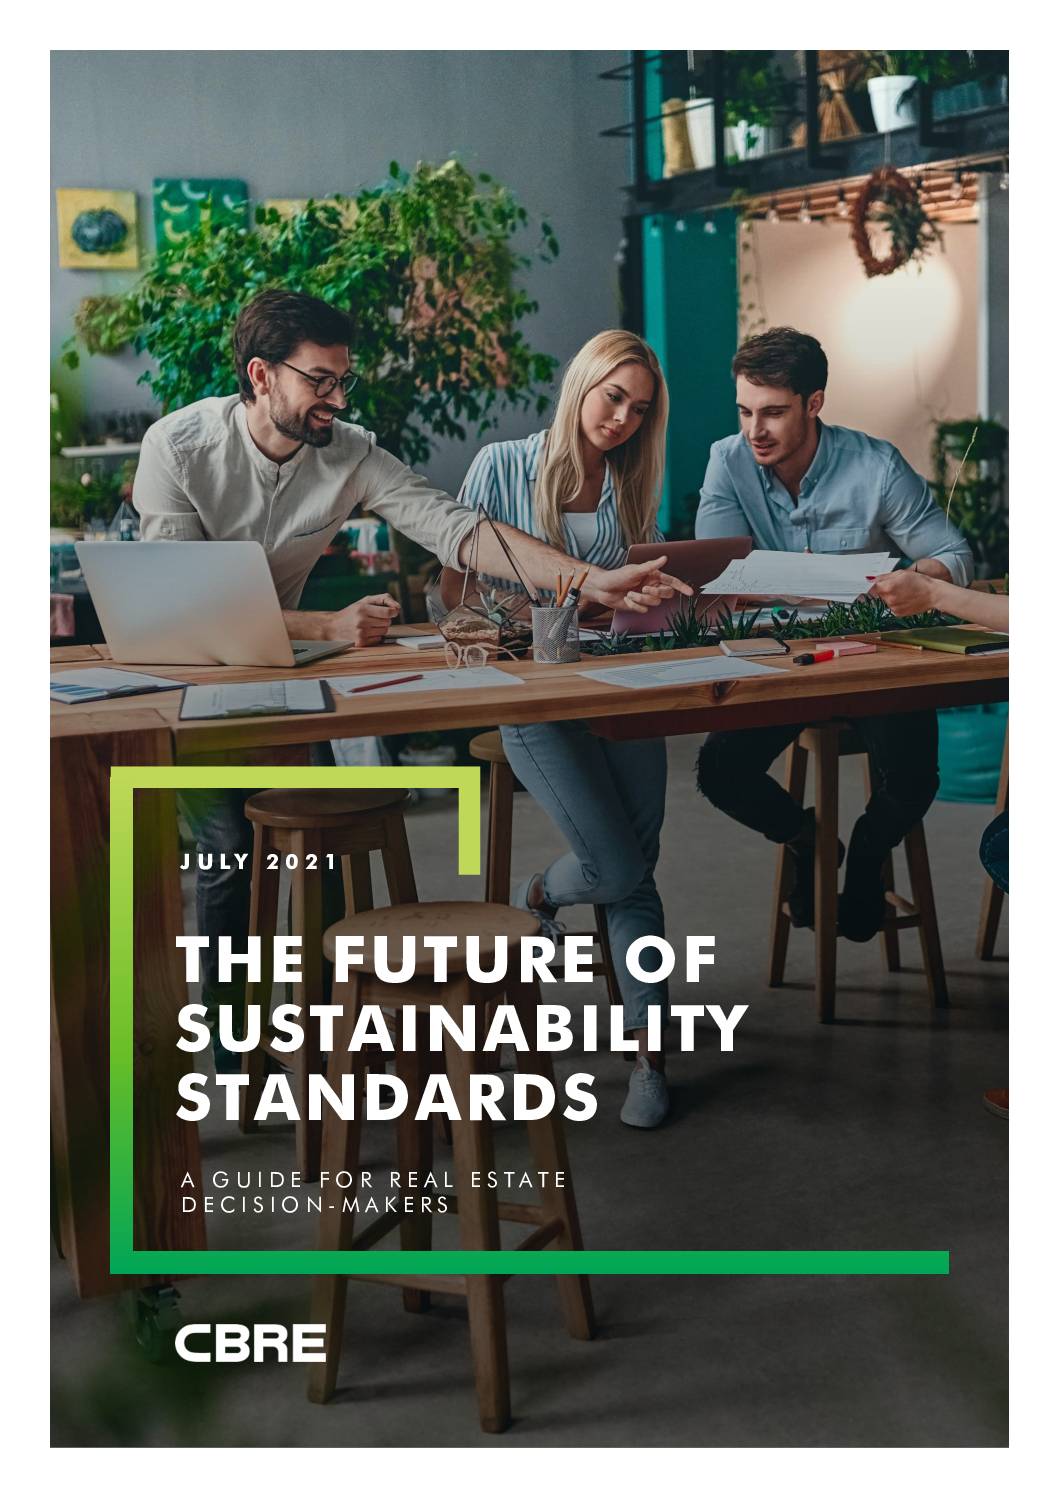 The Future of Sustainability Standards: A Guide for Real Estate Decision-Makers